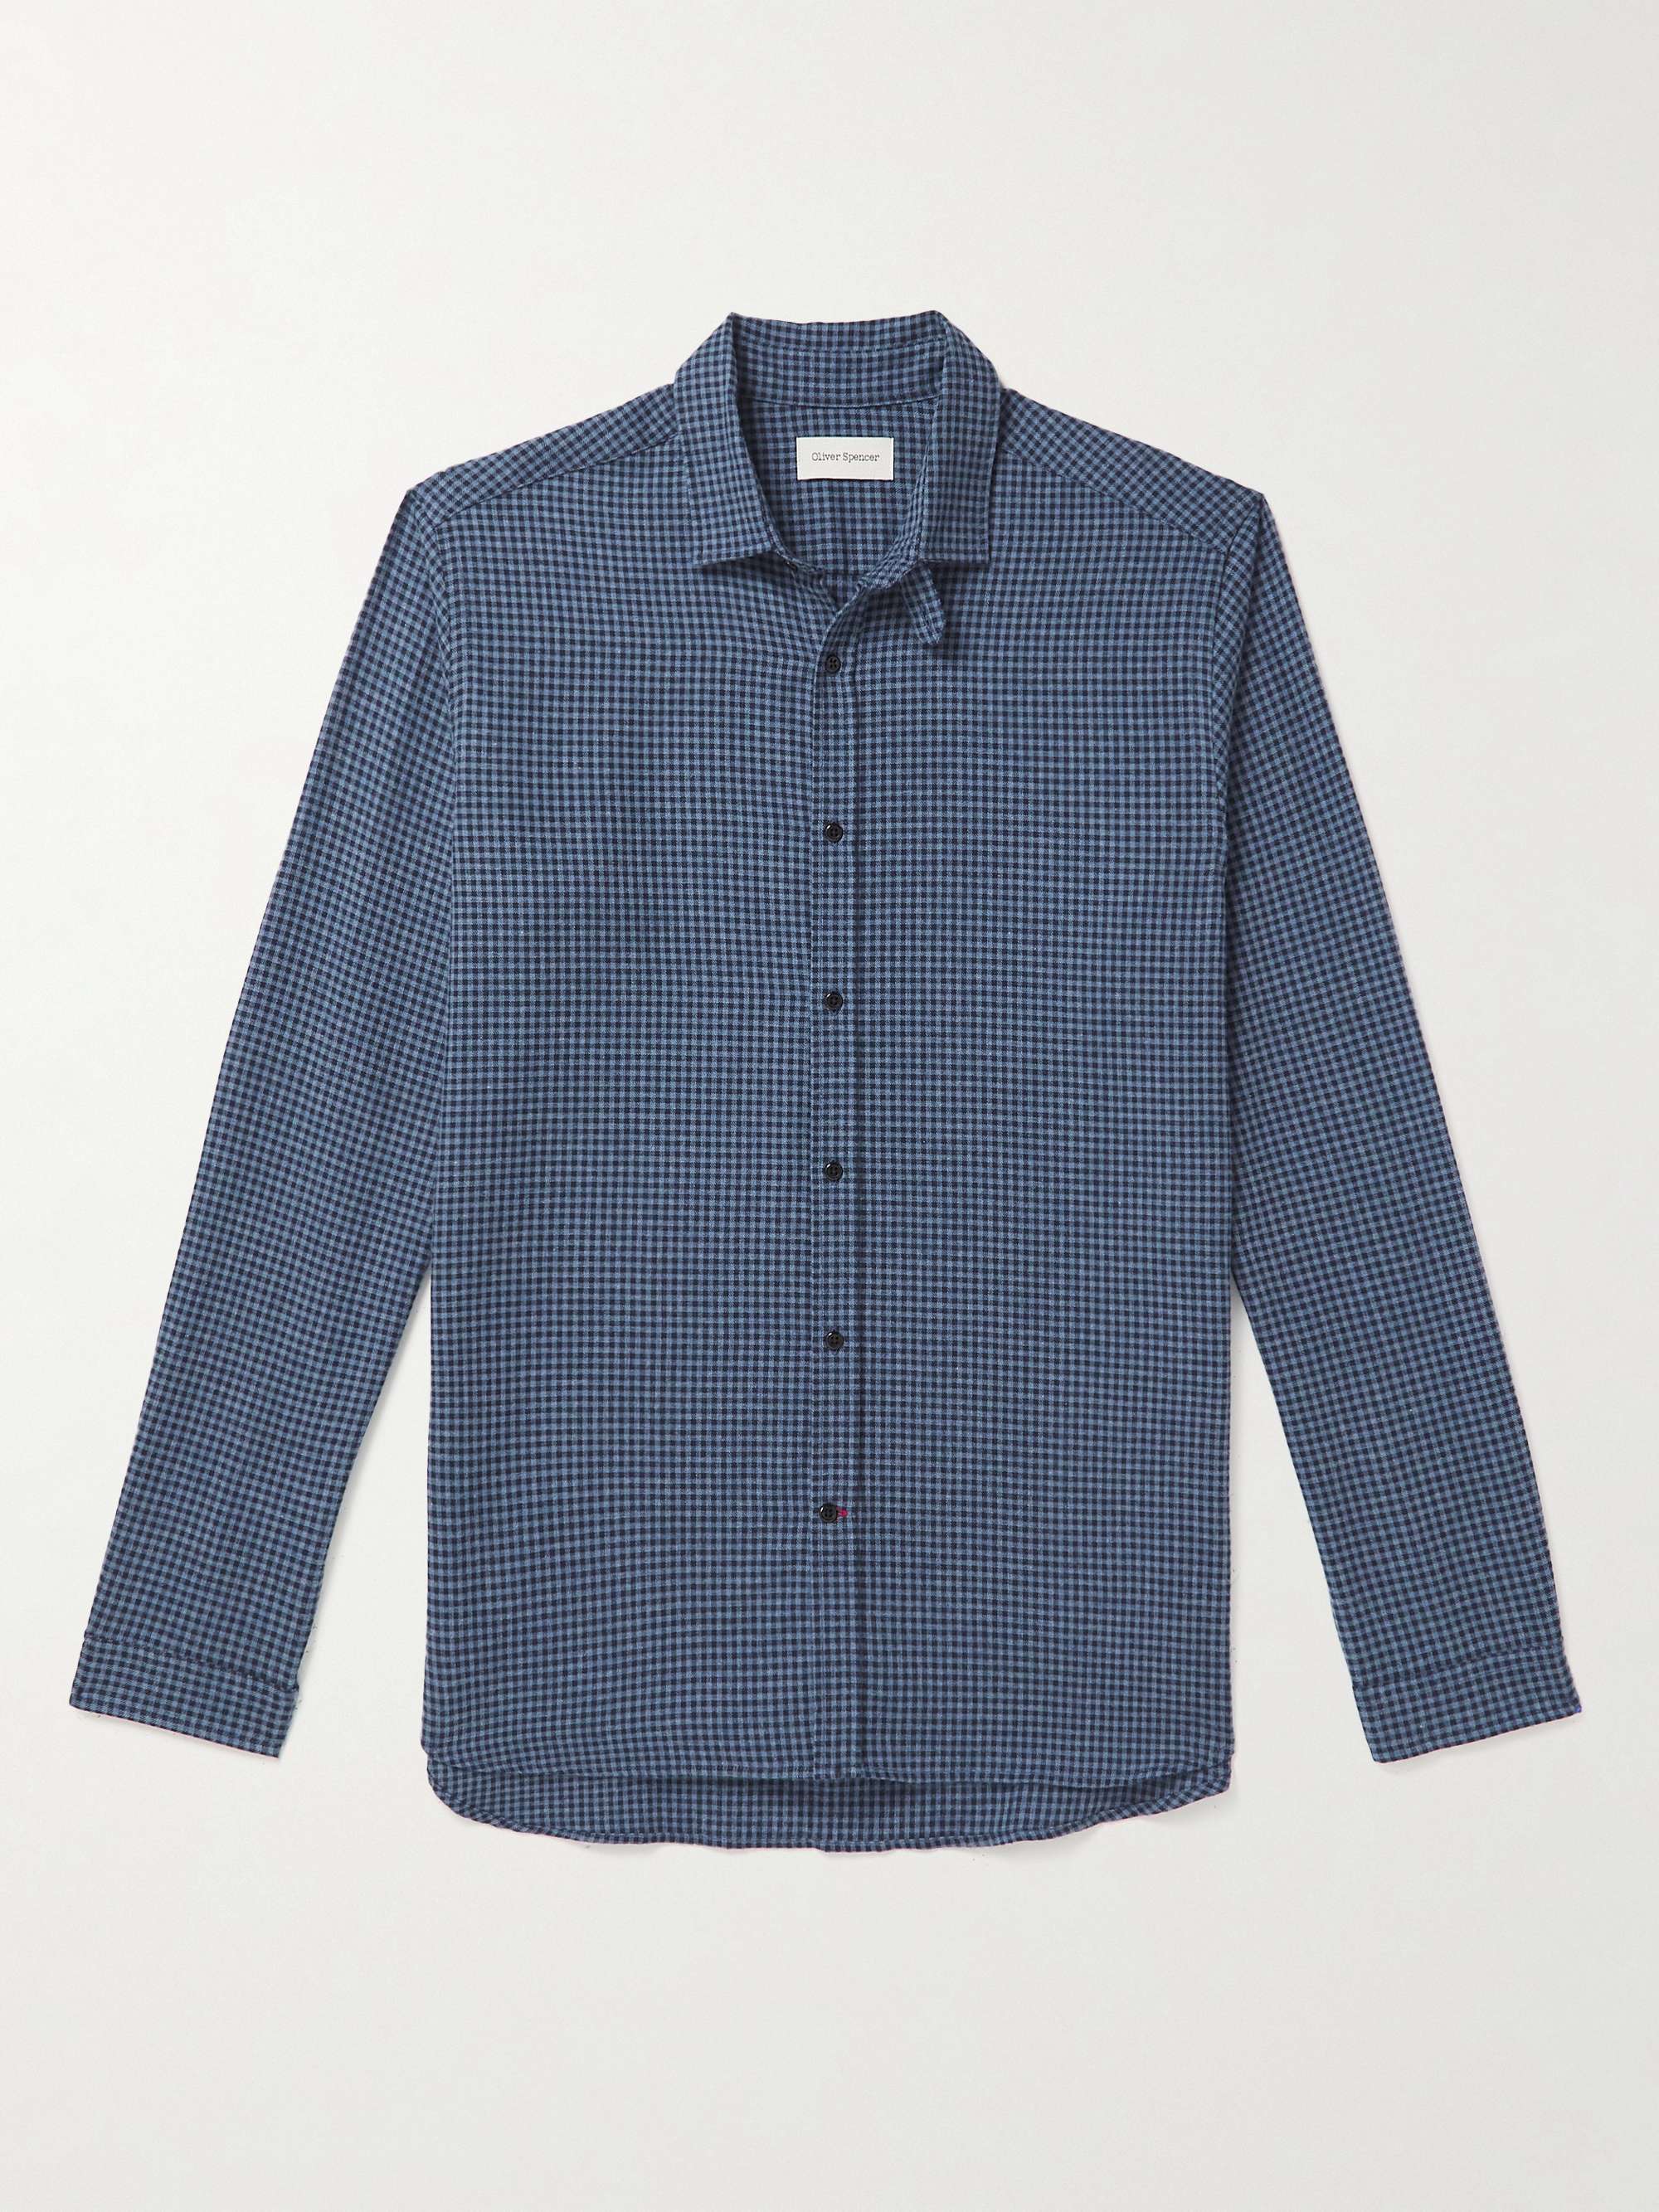 OLIVER SPENCER Clerkenwell Checked Cotton-Flannel Shirt